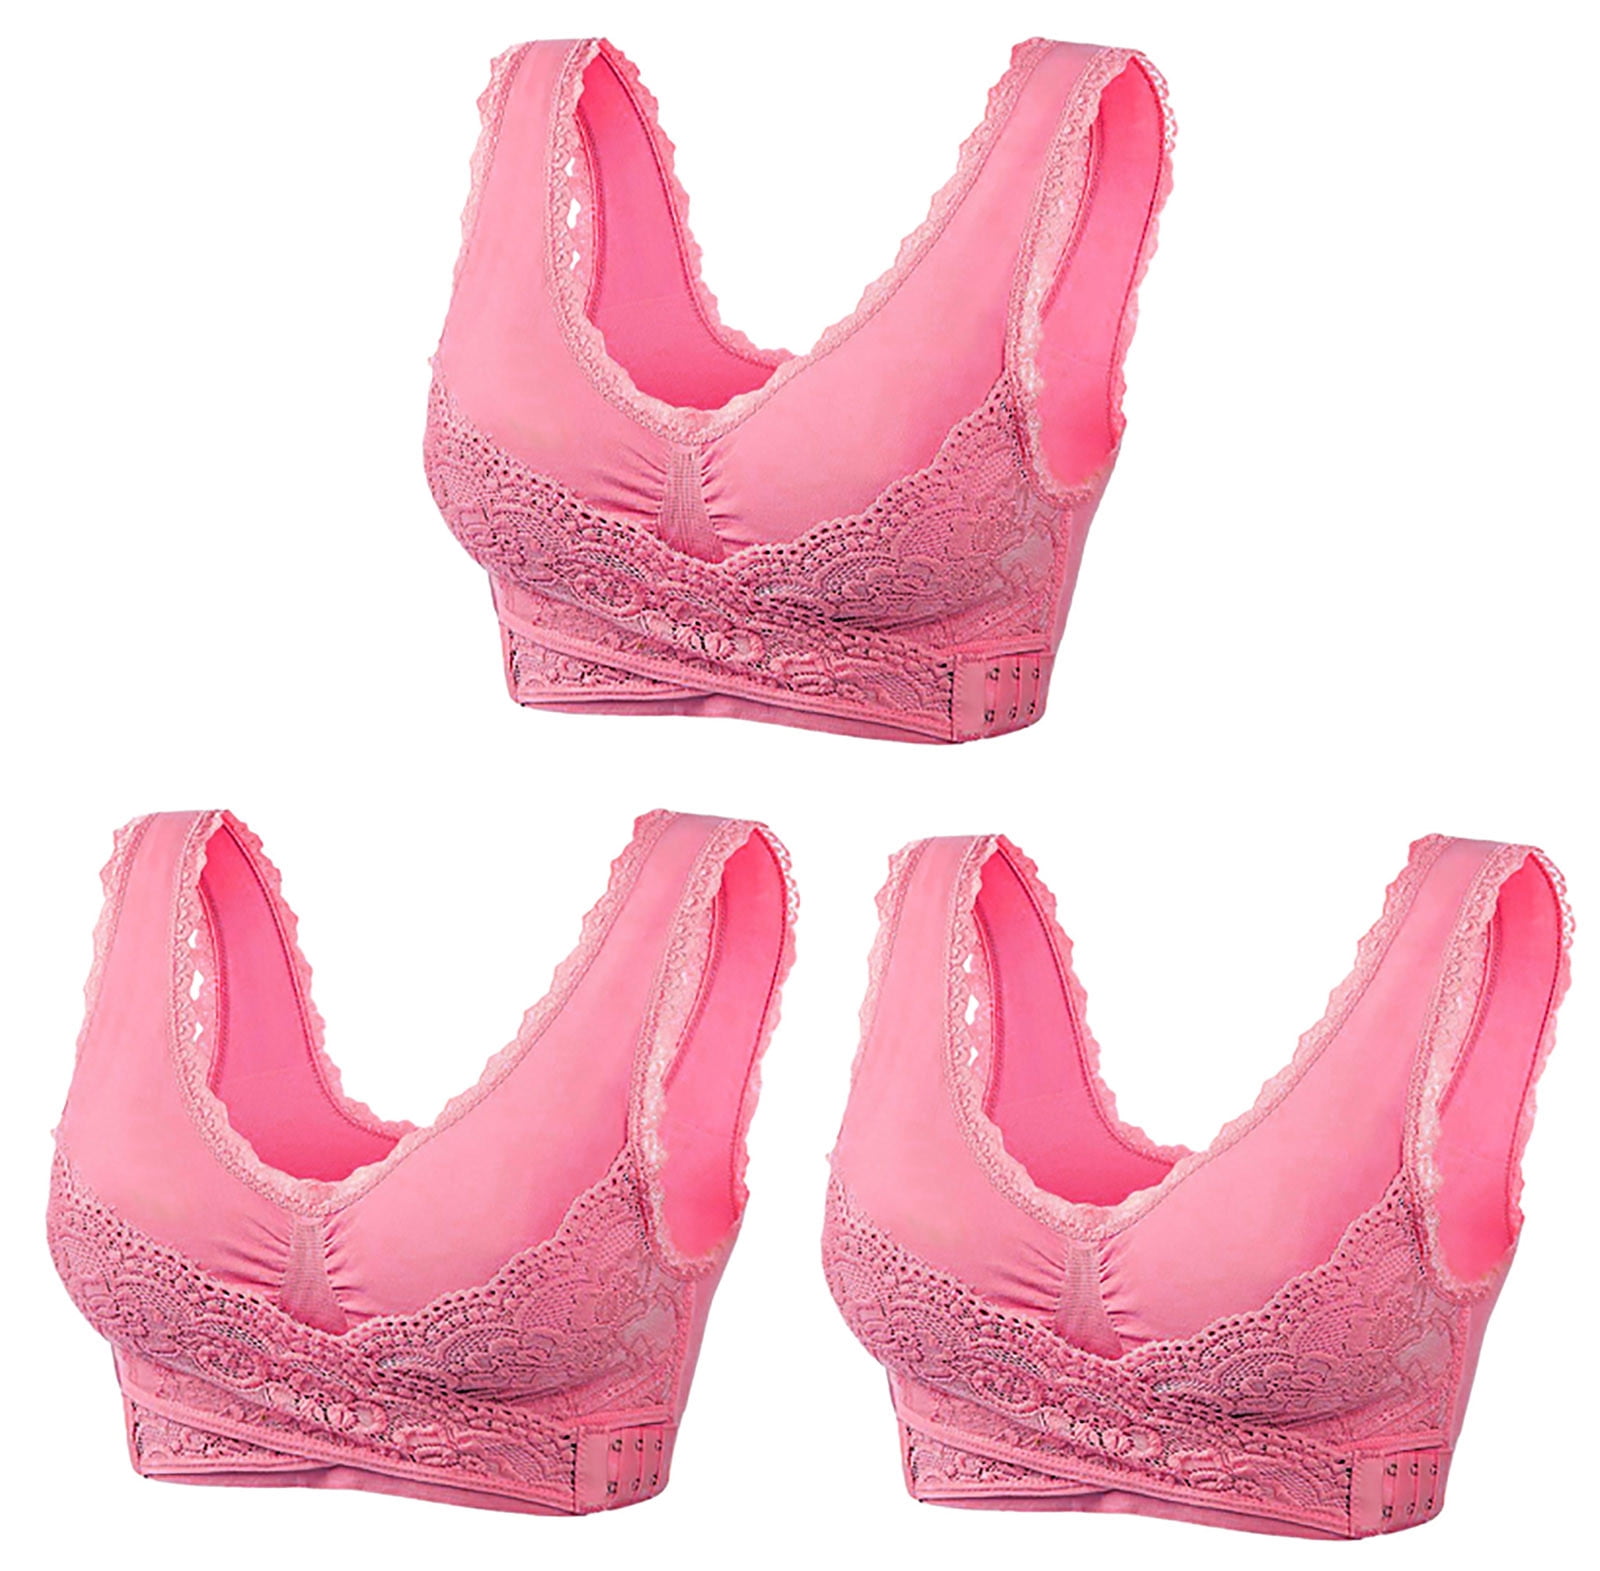 Kendally Corset Bra,Front Cross Side Buckle Wireless Lace Bras,Kendally Comfy  Corset Bra Front Cross Side Buckle Lace Bras,Front Cross Side Buckle  Wireless Lace Bras for Women (Color : Pink, Size : at